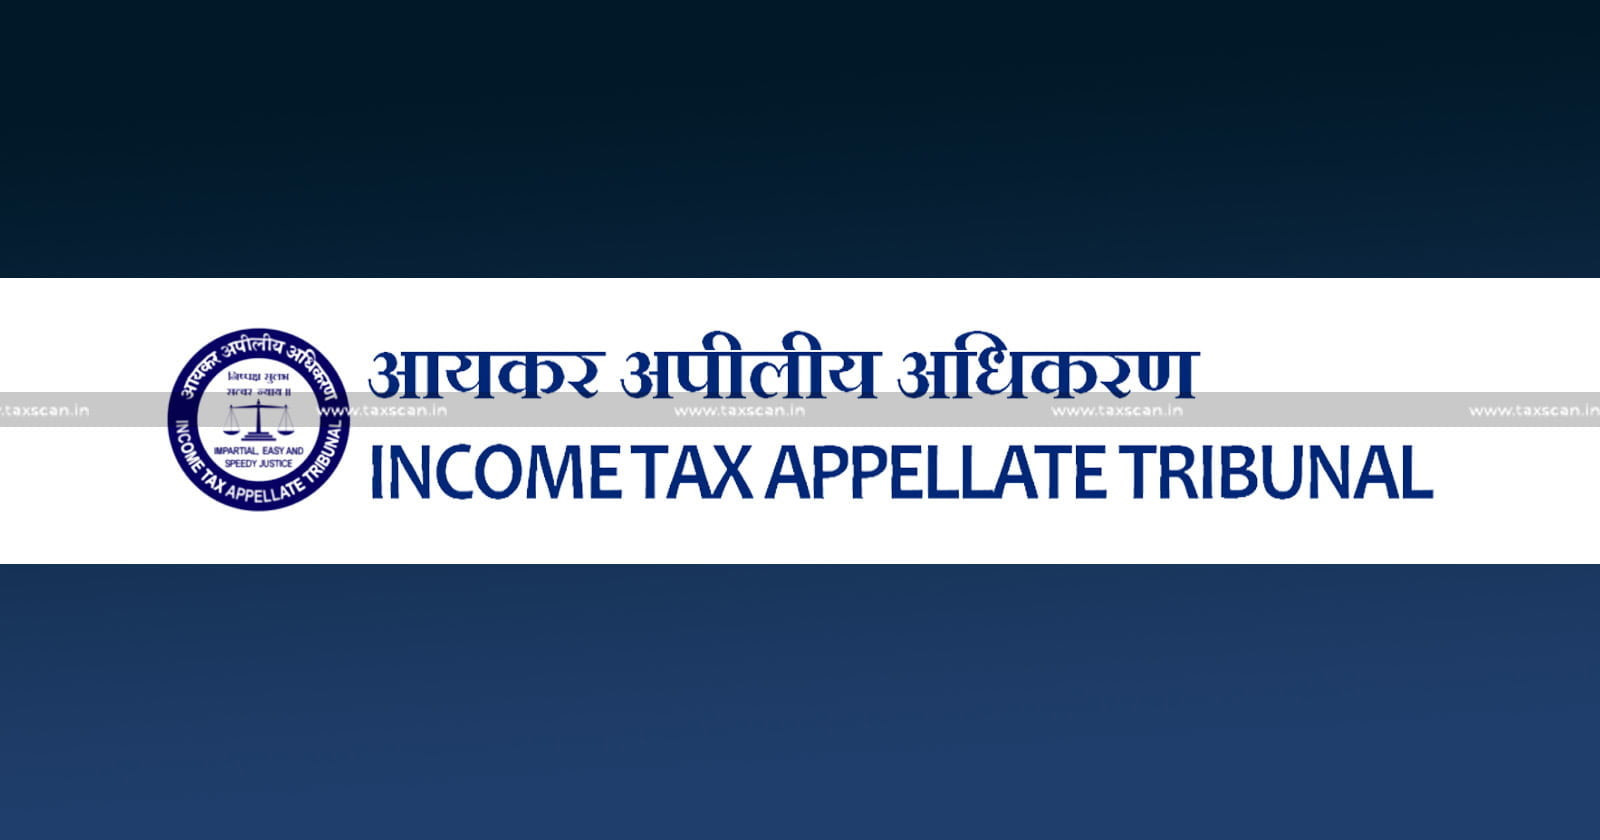 Addition - Invoking the Deeming Provision - Income Tax Act - ITAT - Income Tax - Deeming Provision - taxscan